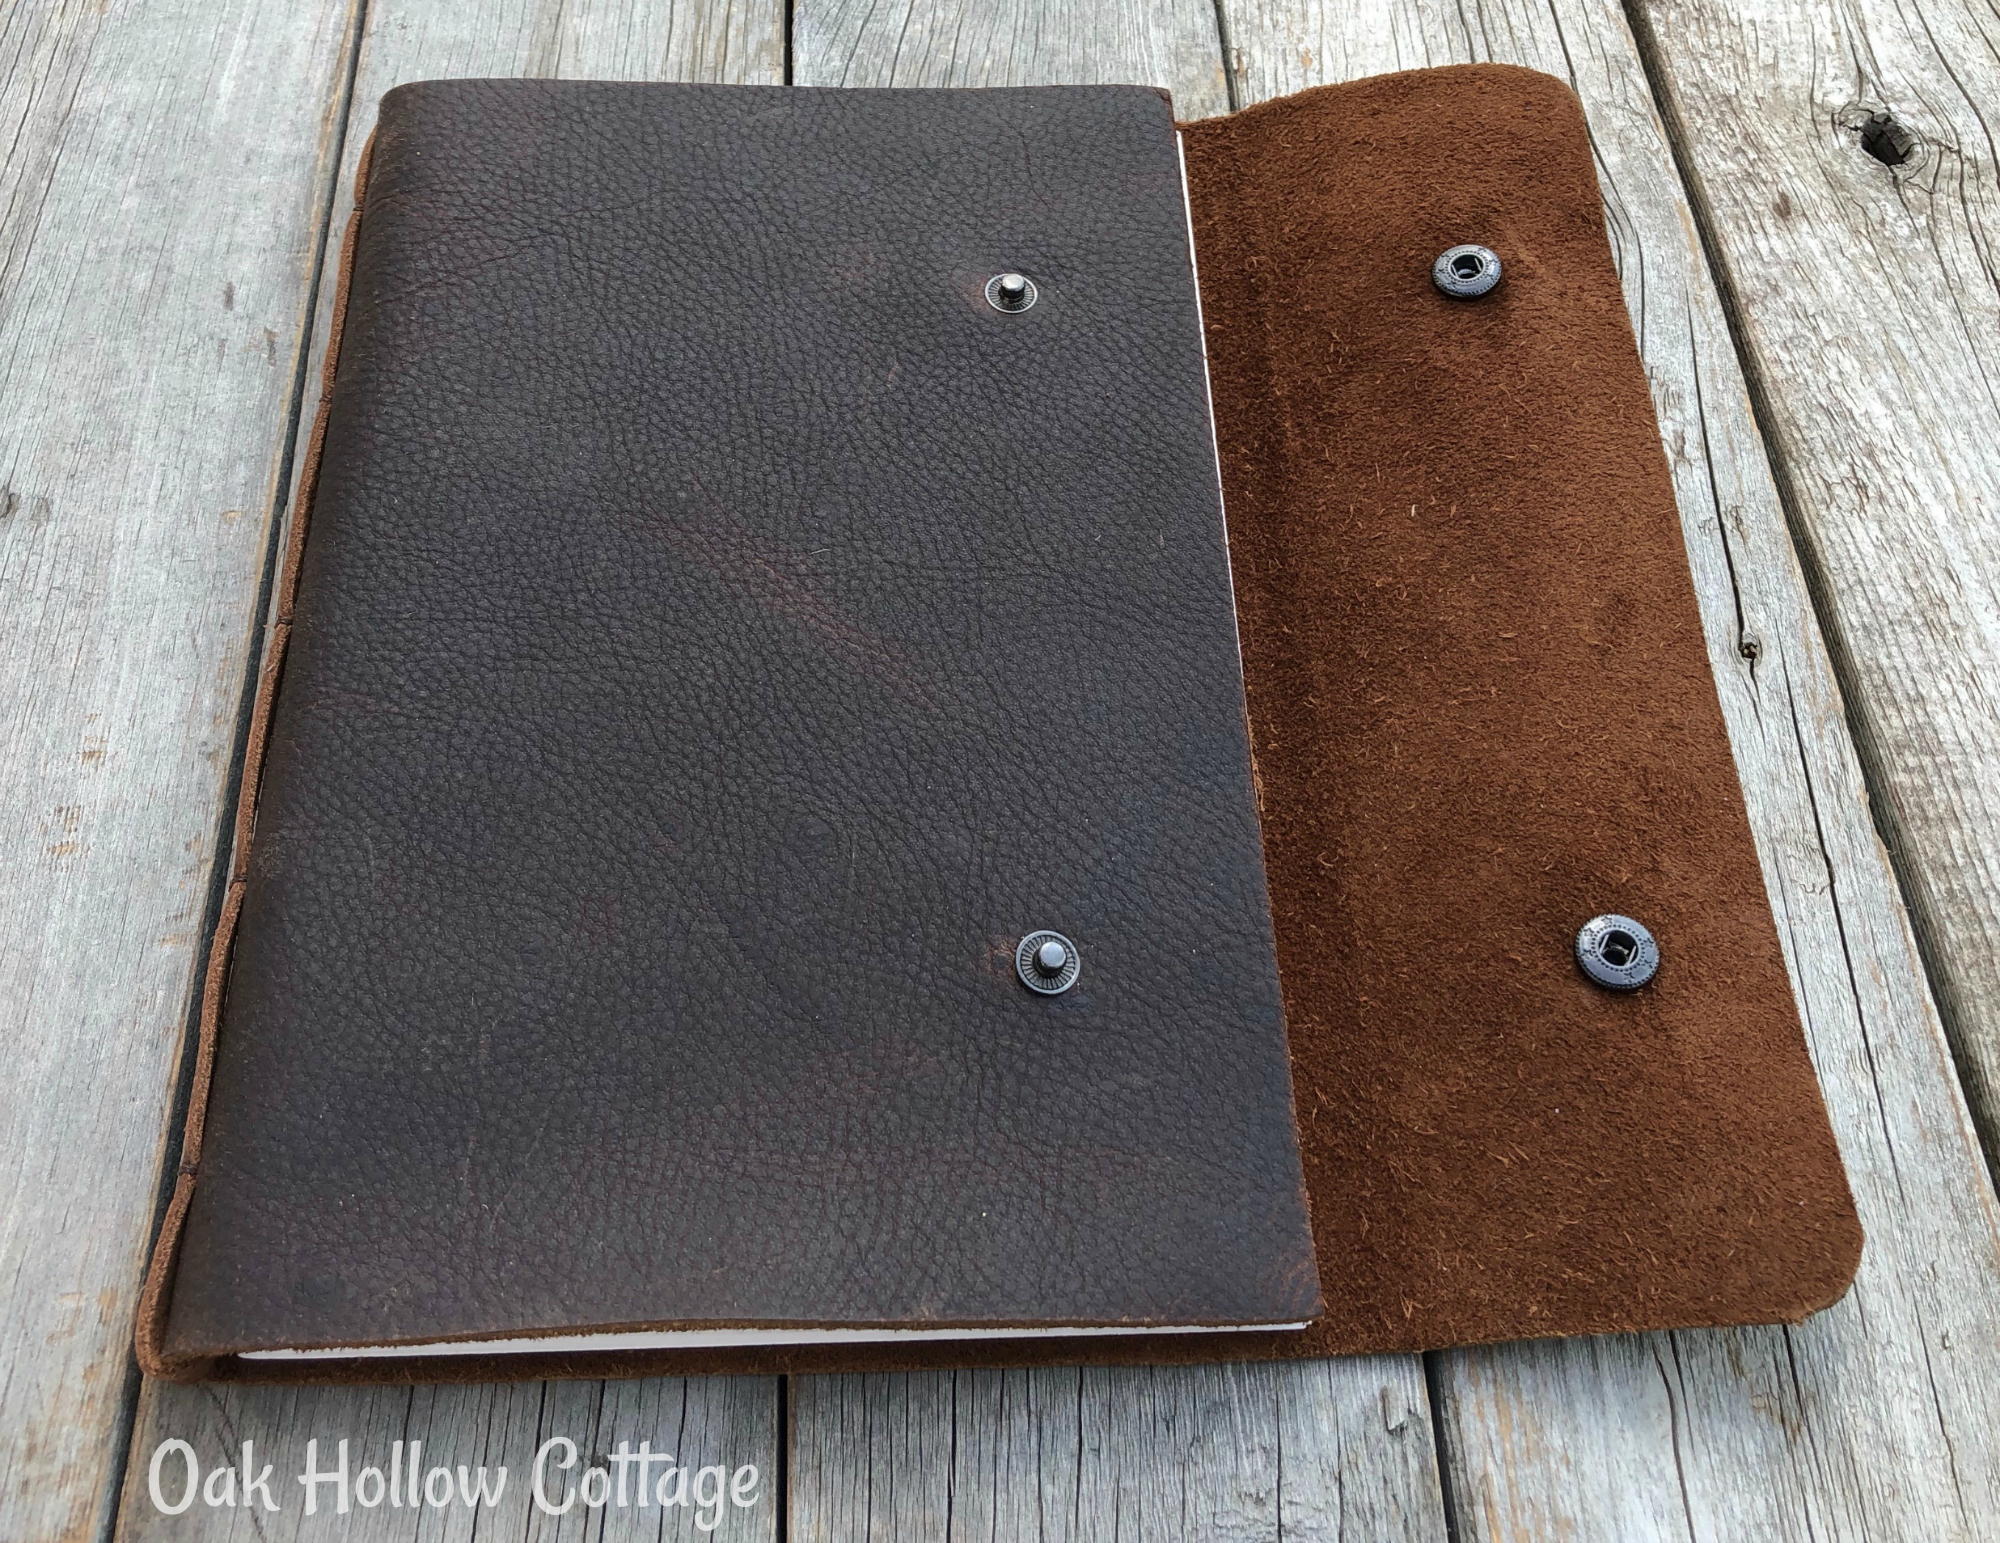 Need a unique gift for a traveler in your life? Looking for a sturdy travel journal for yourself? Our handmade leather travel journals make great gifts for yourself or others. Order them at etsy.com/shop/OakHollowCottage.